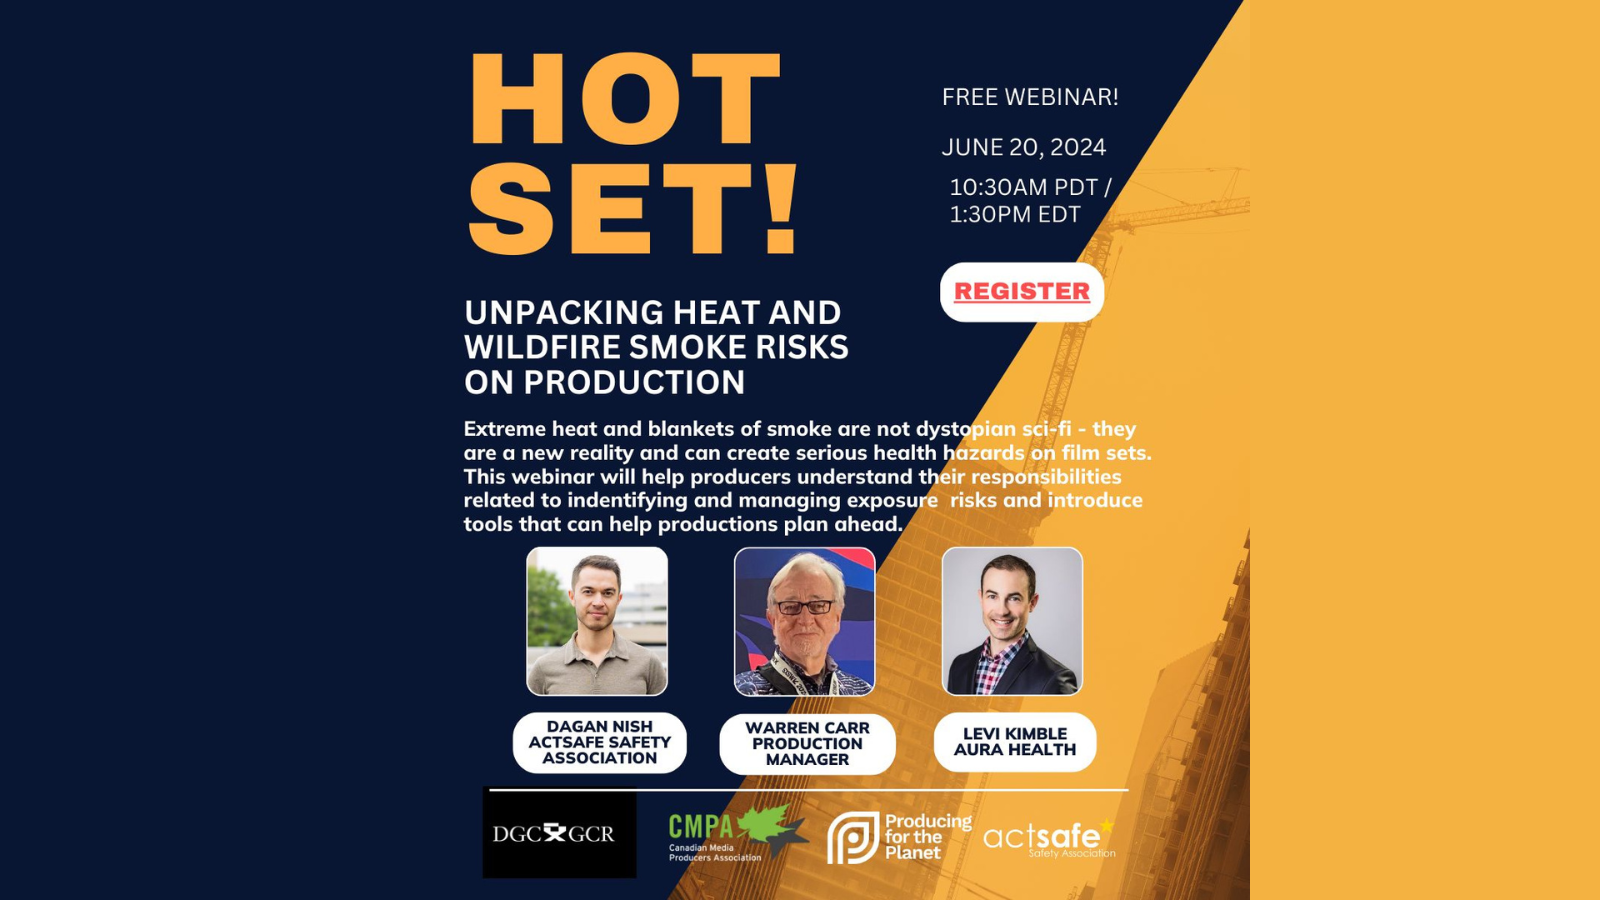 Hot Set! Unpacking Heat and Wildfire Smoke Risks on Production